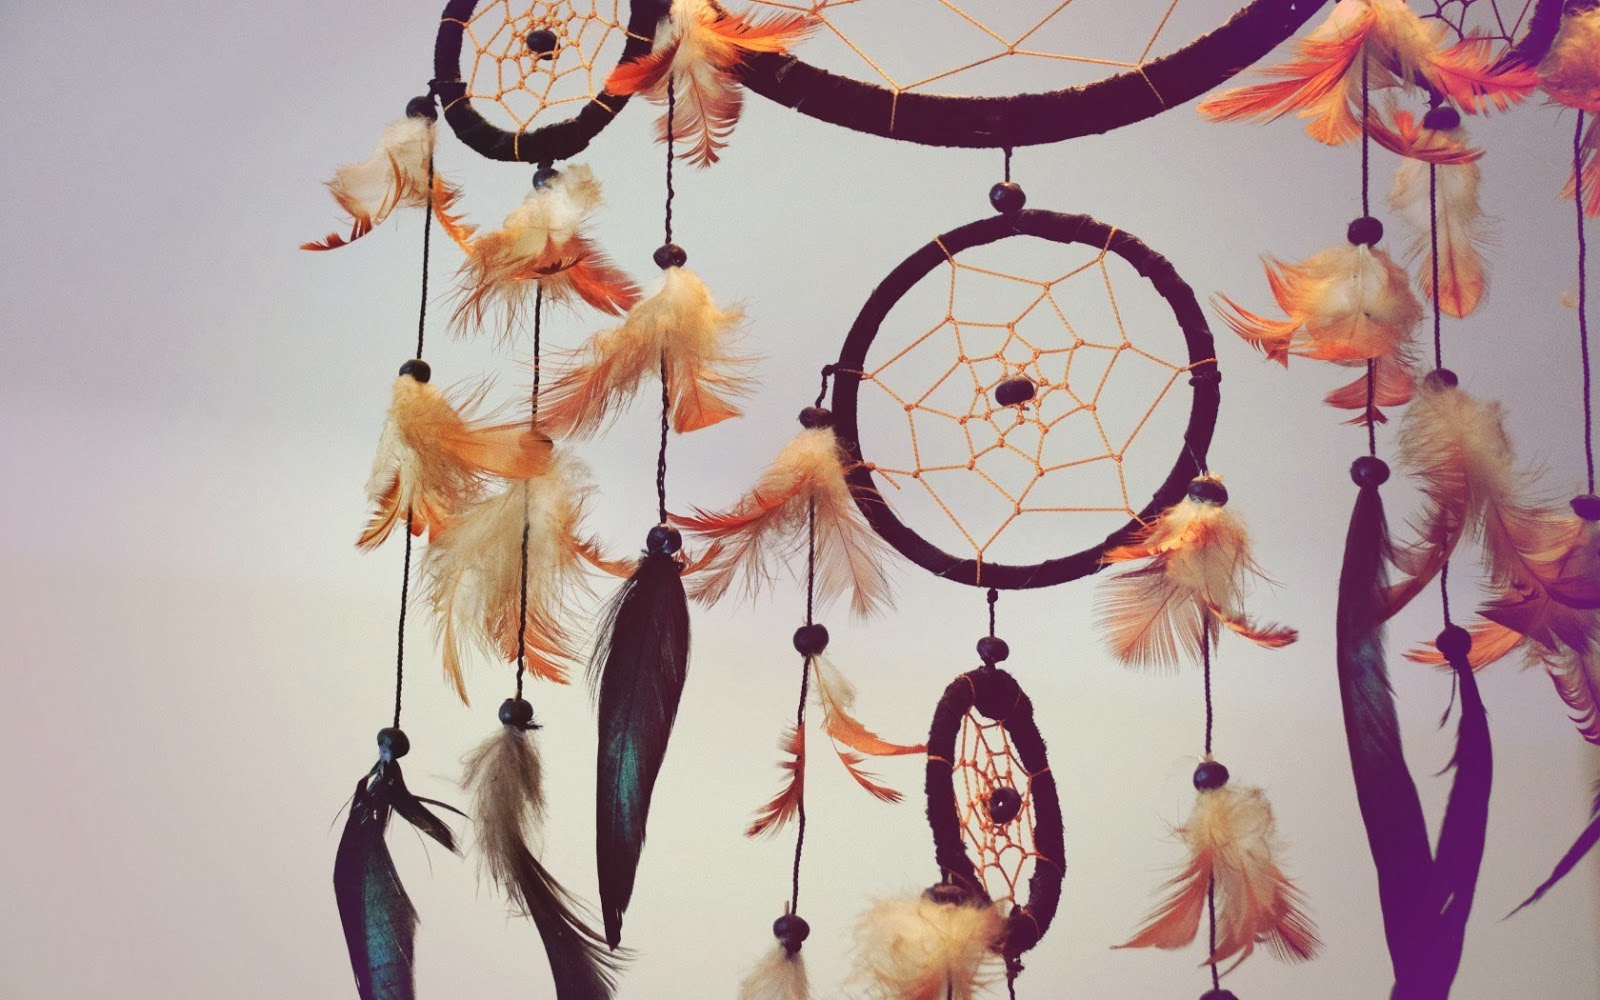 Pin by Barbaras Little Spot on my pins | Dream catcher, Dream catcher art, Dreamcatcher  wallpaper